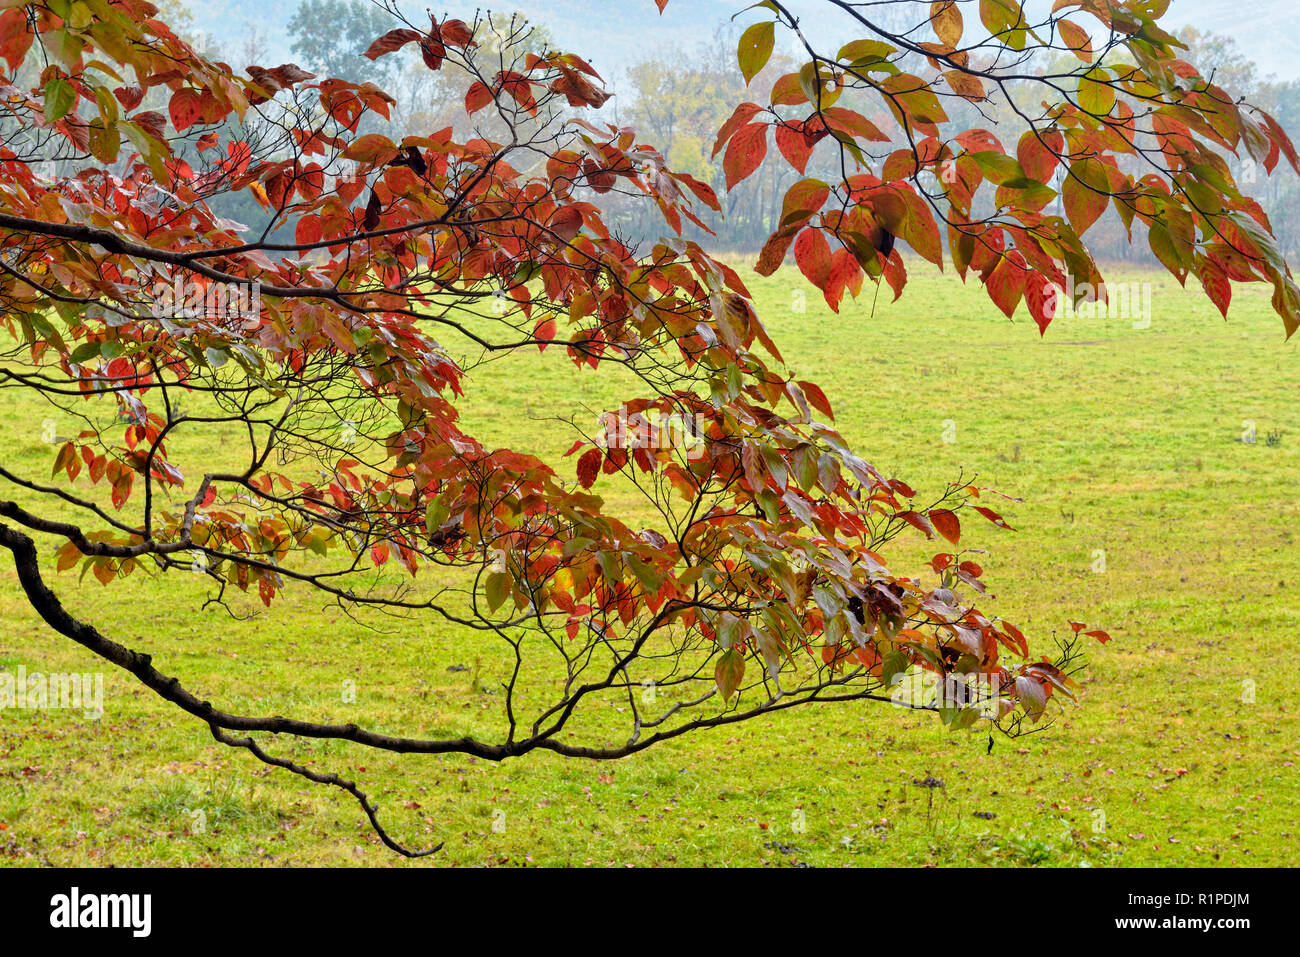 Flowering dogwood tree branches with autumn foliage overhanging a pasture in Cades Cove, Great Smoky Mountains National Park, Tennessee, USA Stock Photo